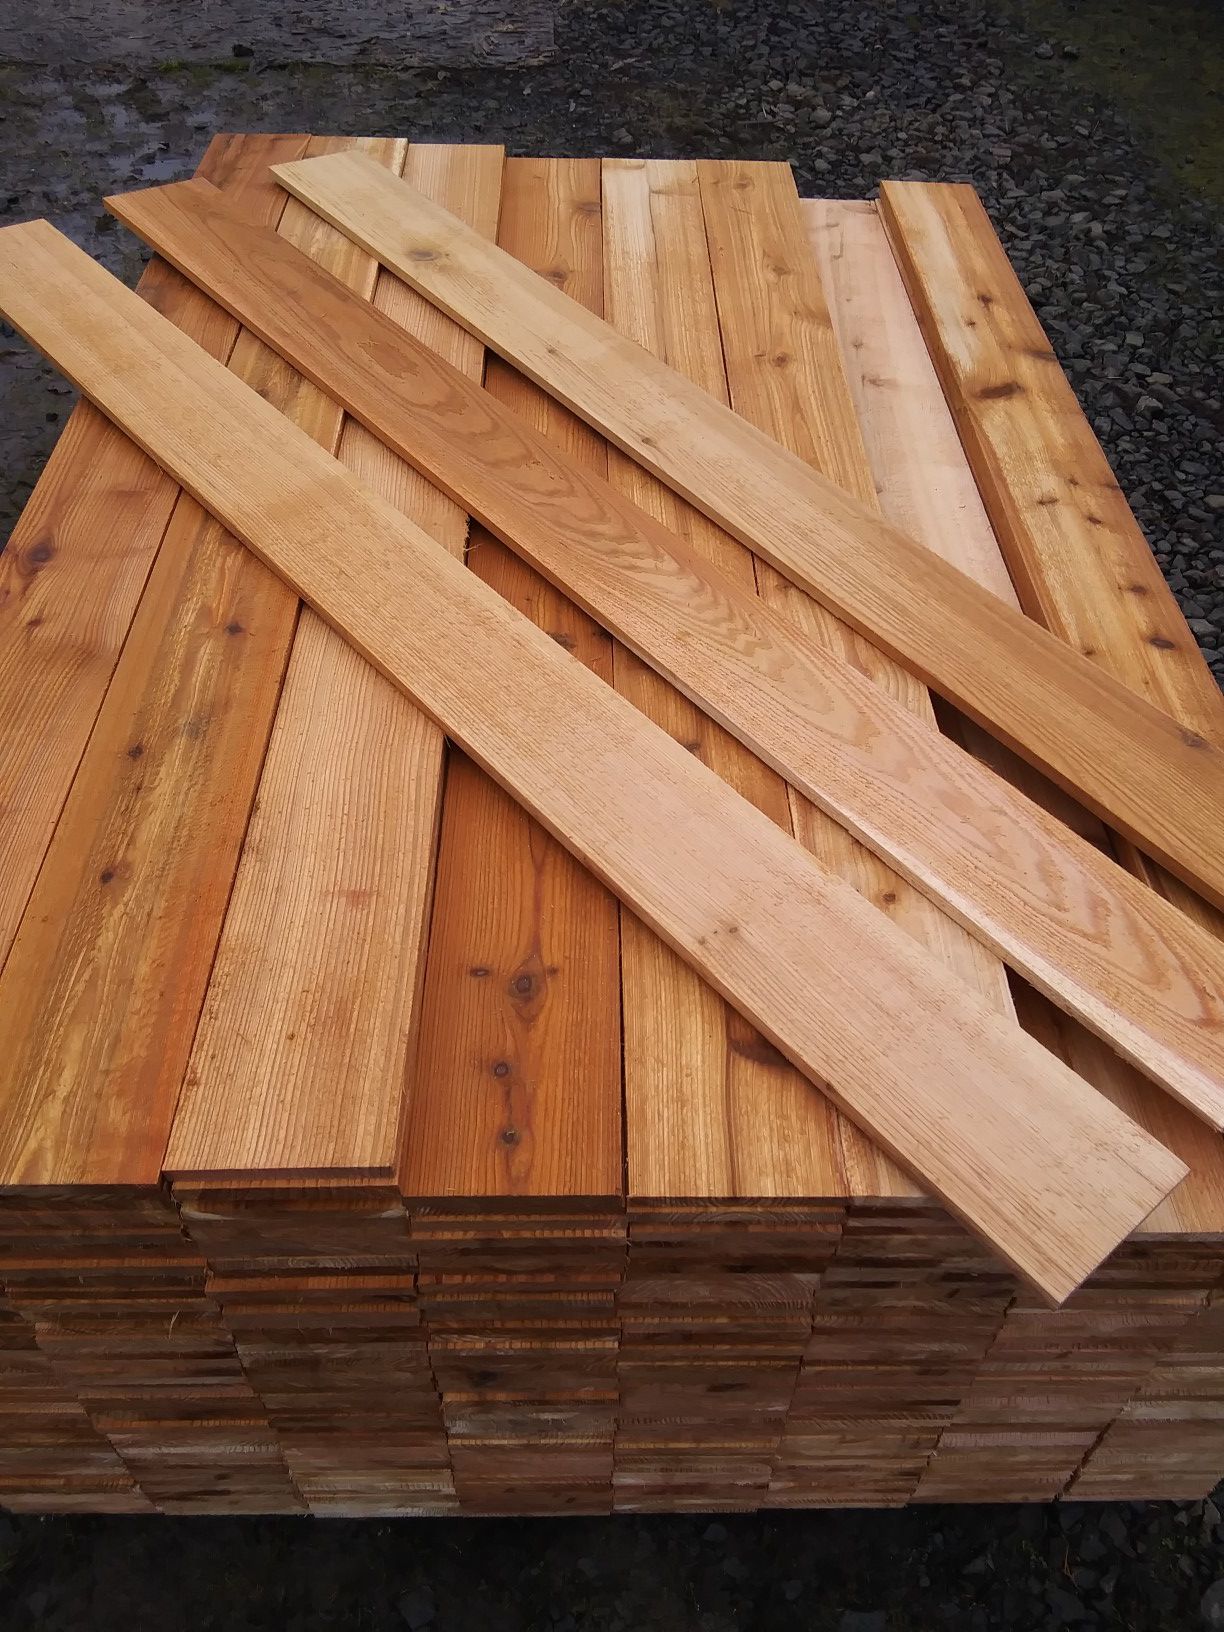 1x6x6 cedar fence boards and fencing materials